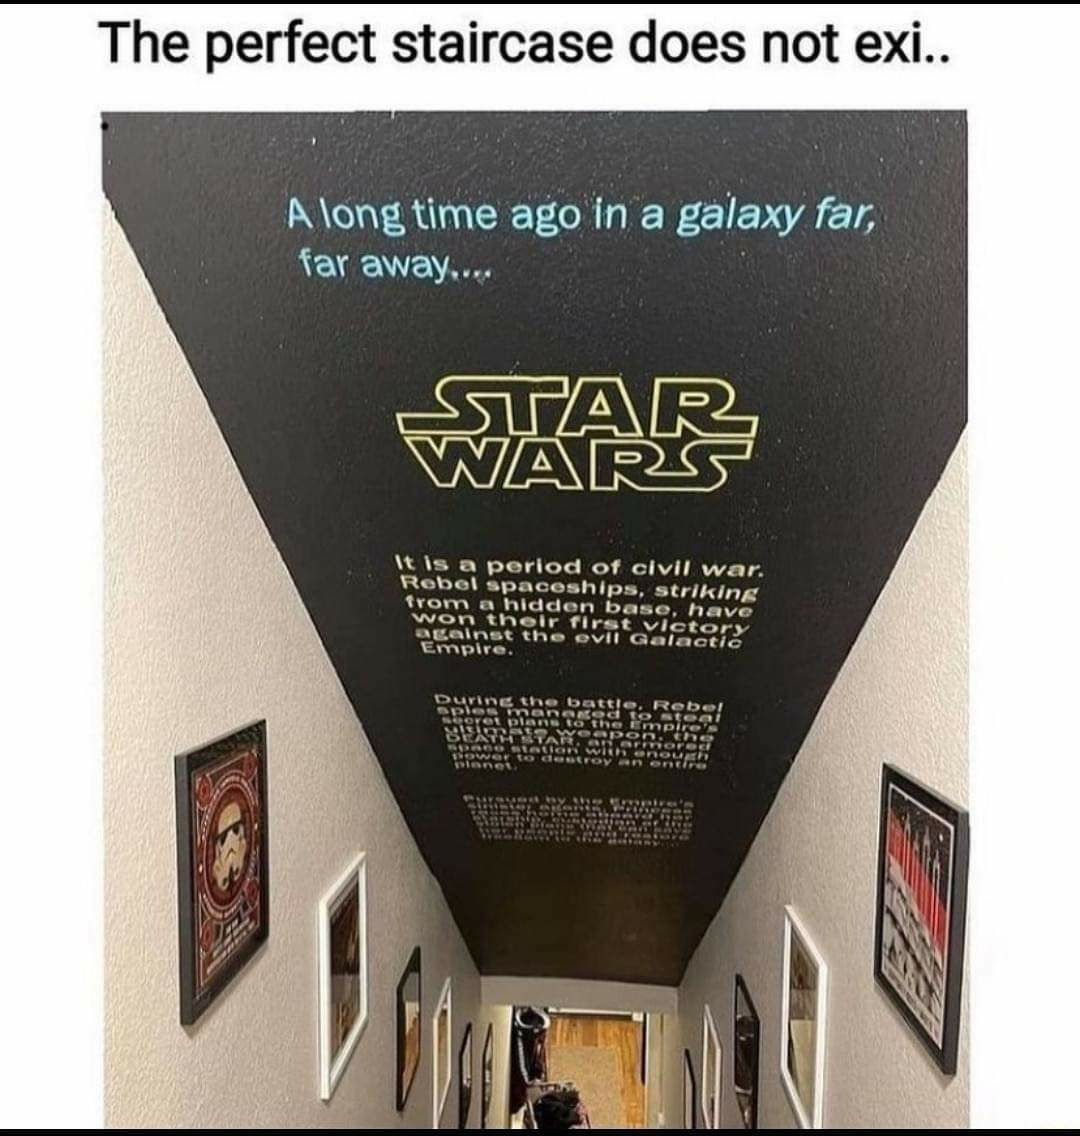 the perfect staircase has been found